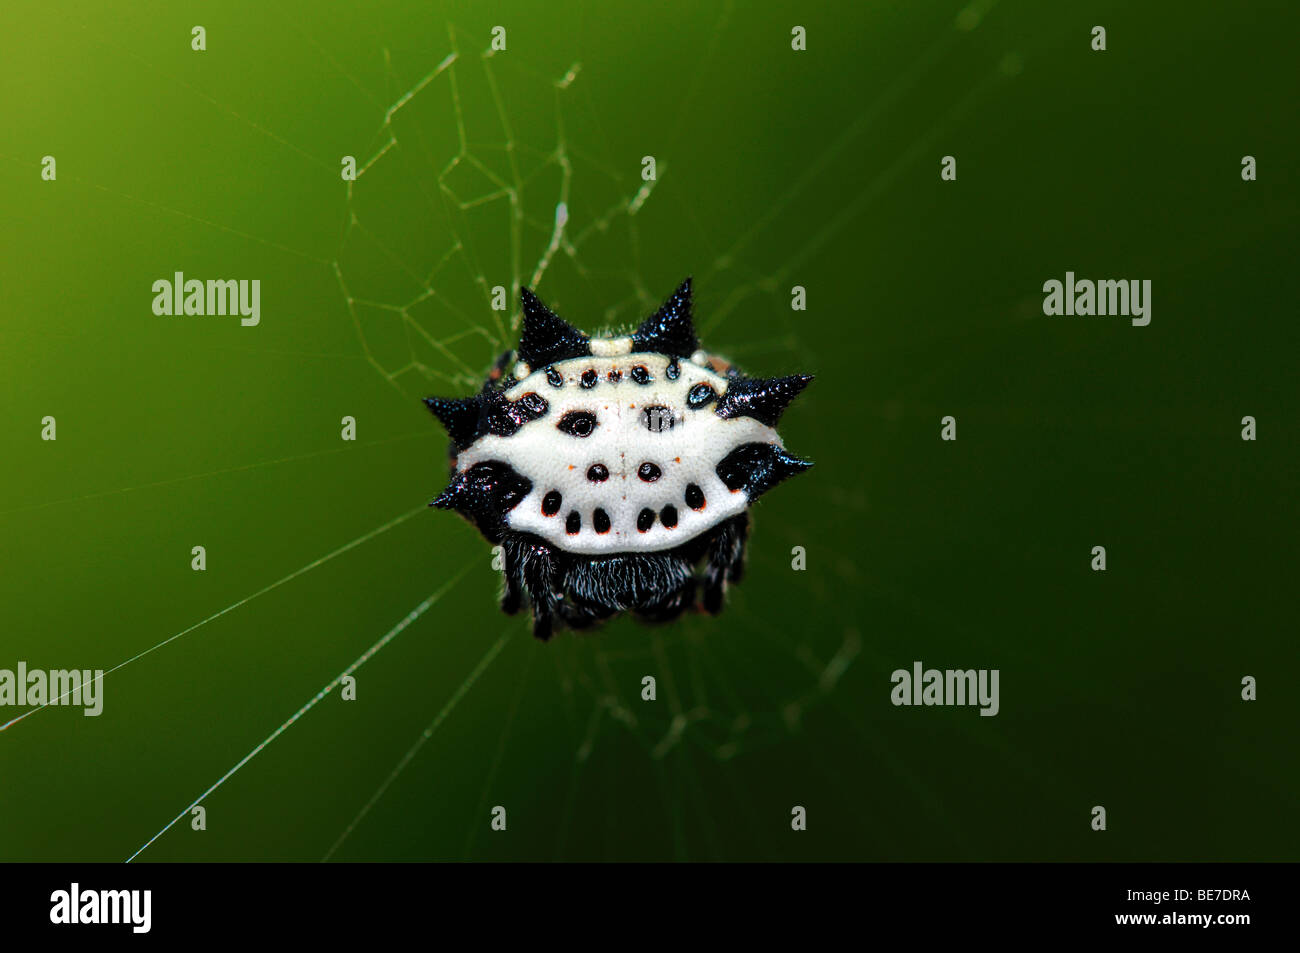 A crab-like spiny orb weaver spider. Stock Photo